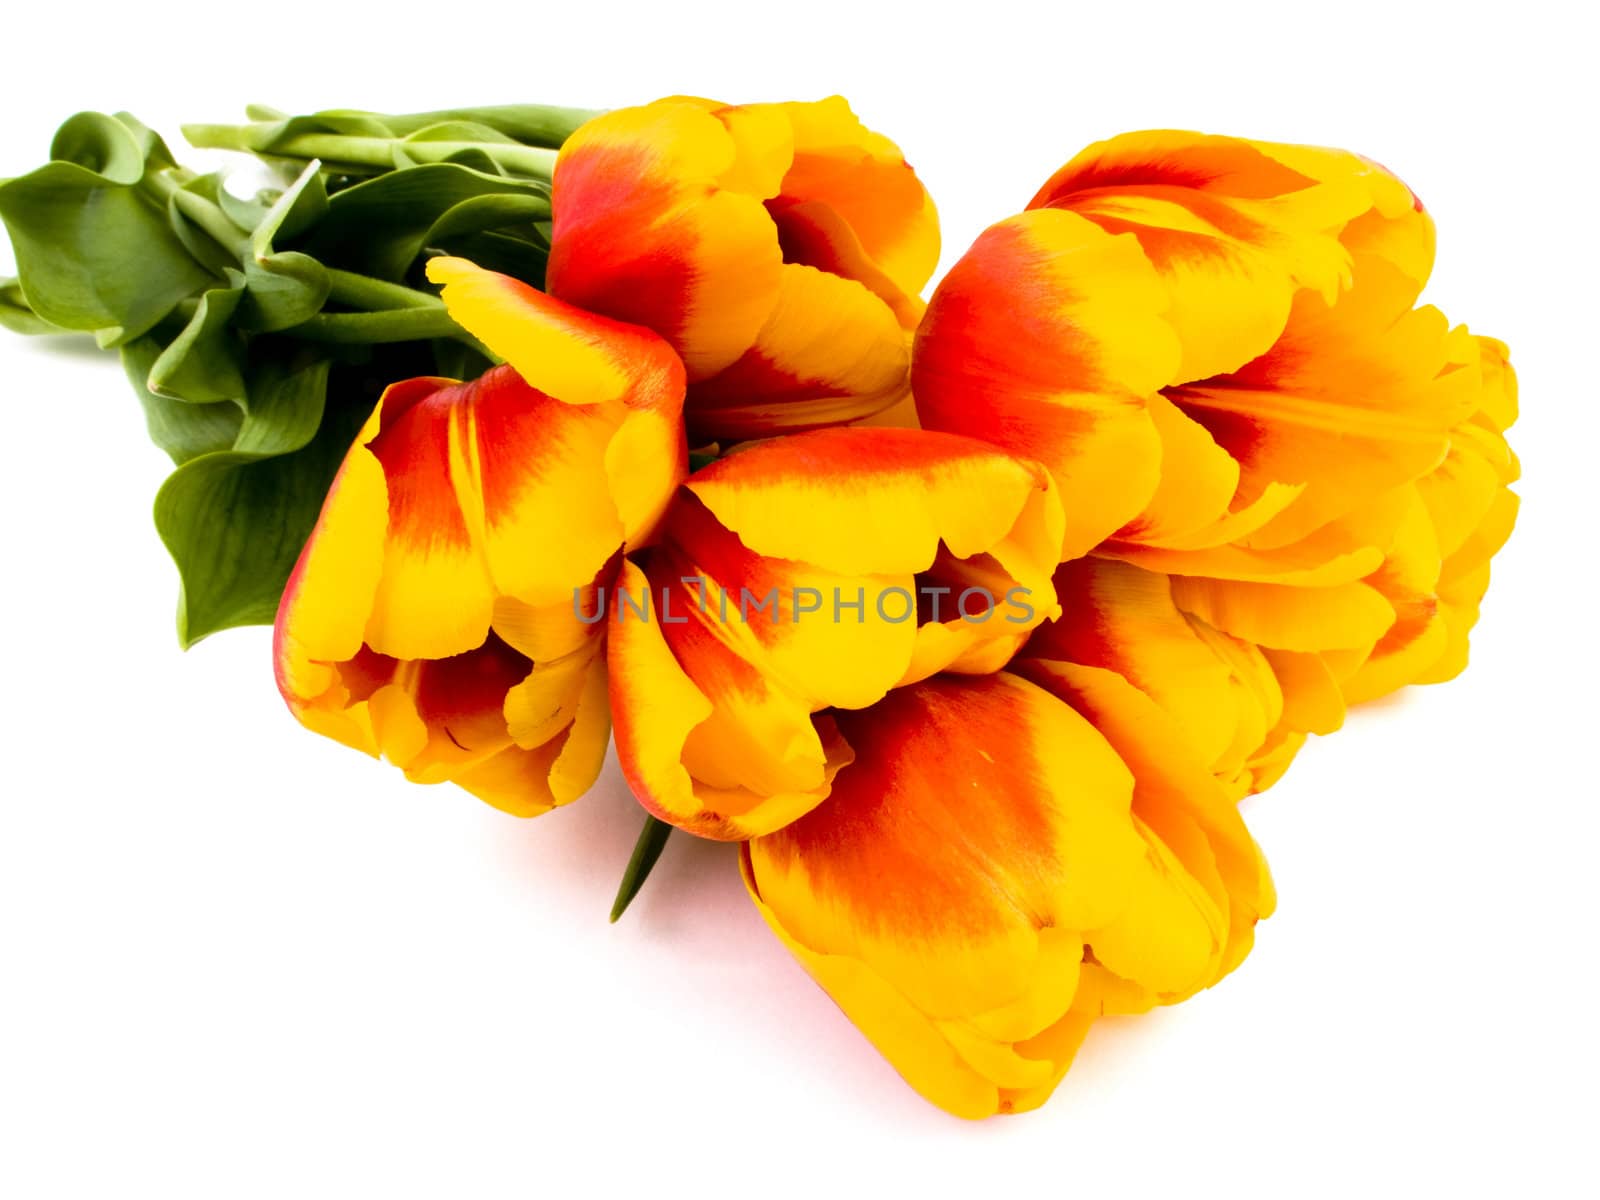 Bouquet of red nad yellow tulips on white background